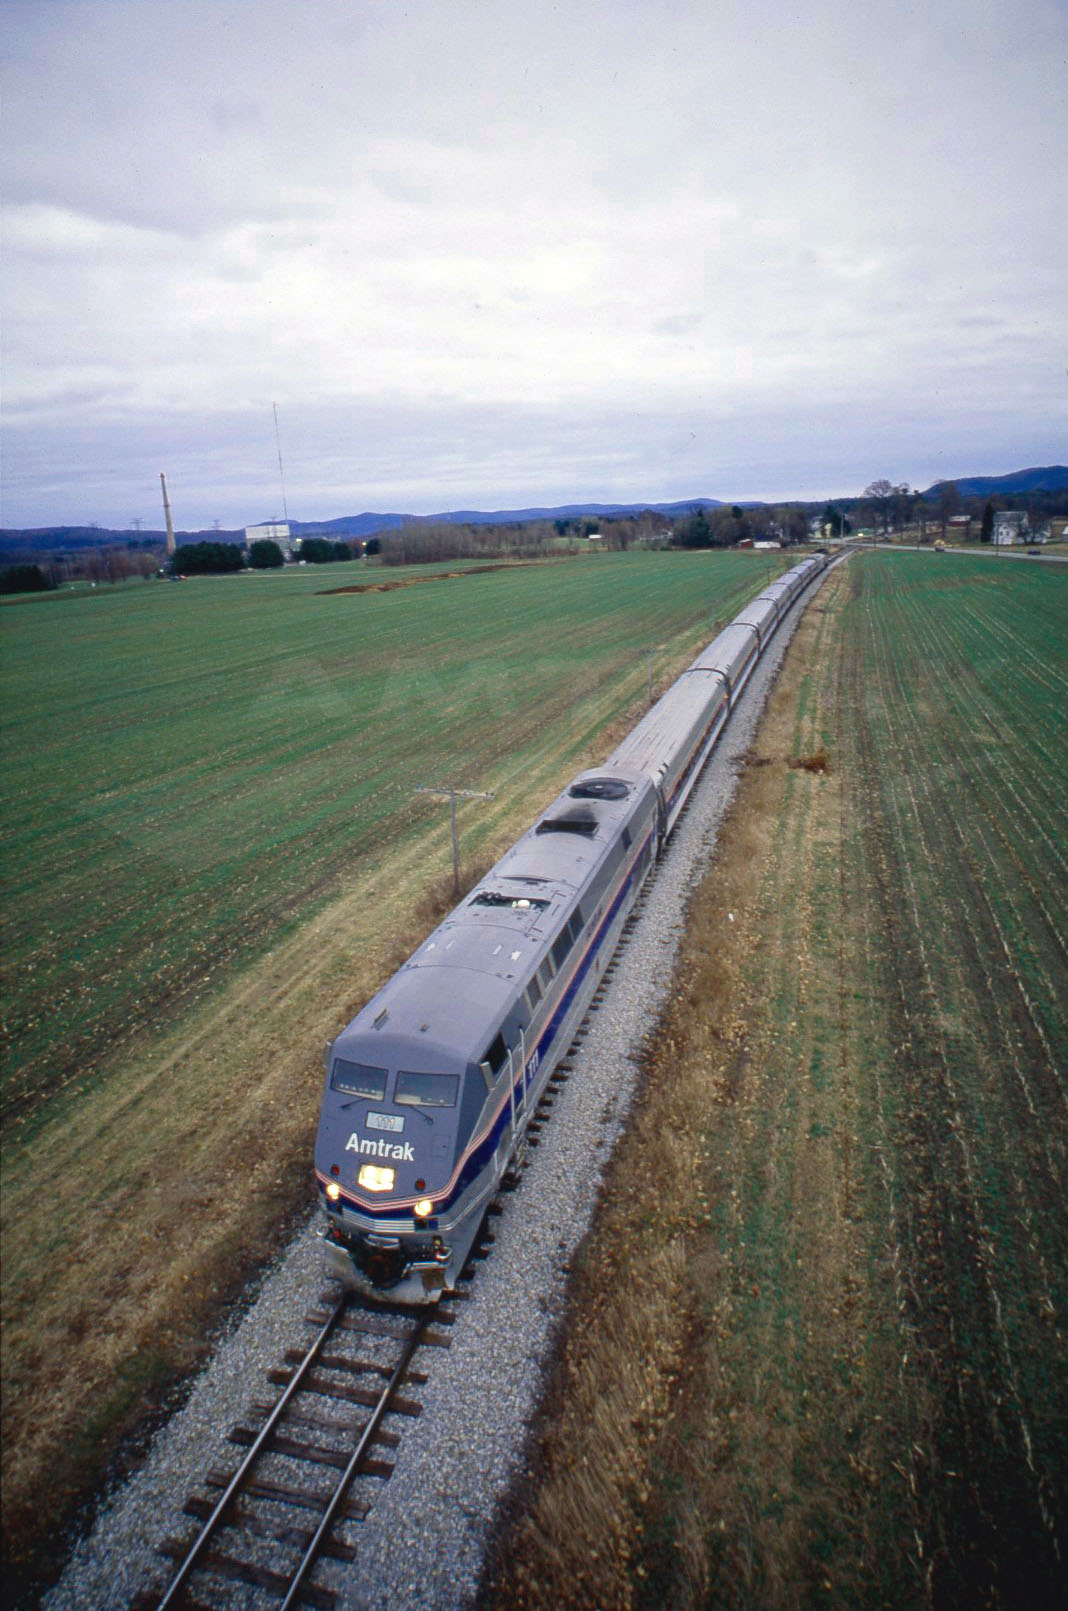 Vermonter passing through the countryside, 1997. — Amtrak: History of